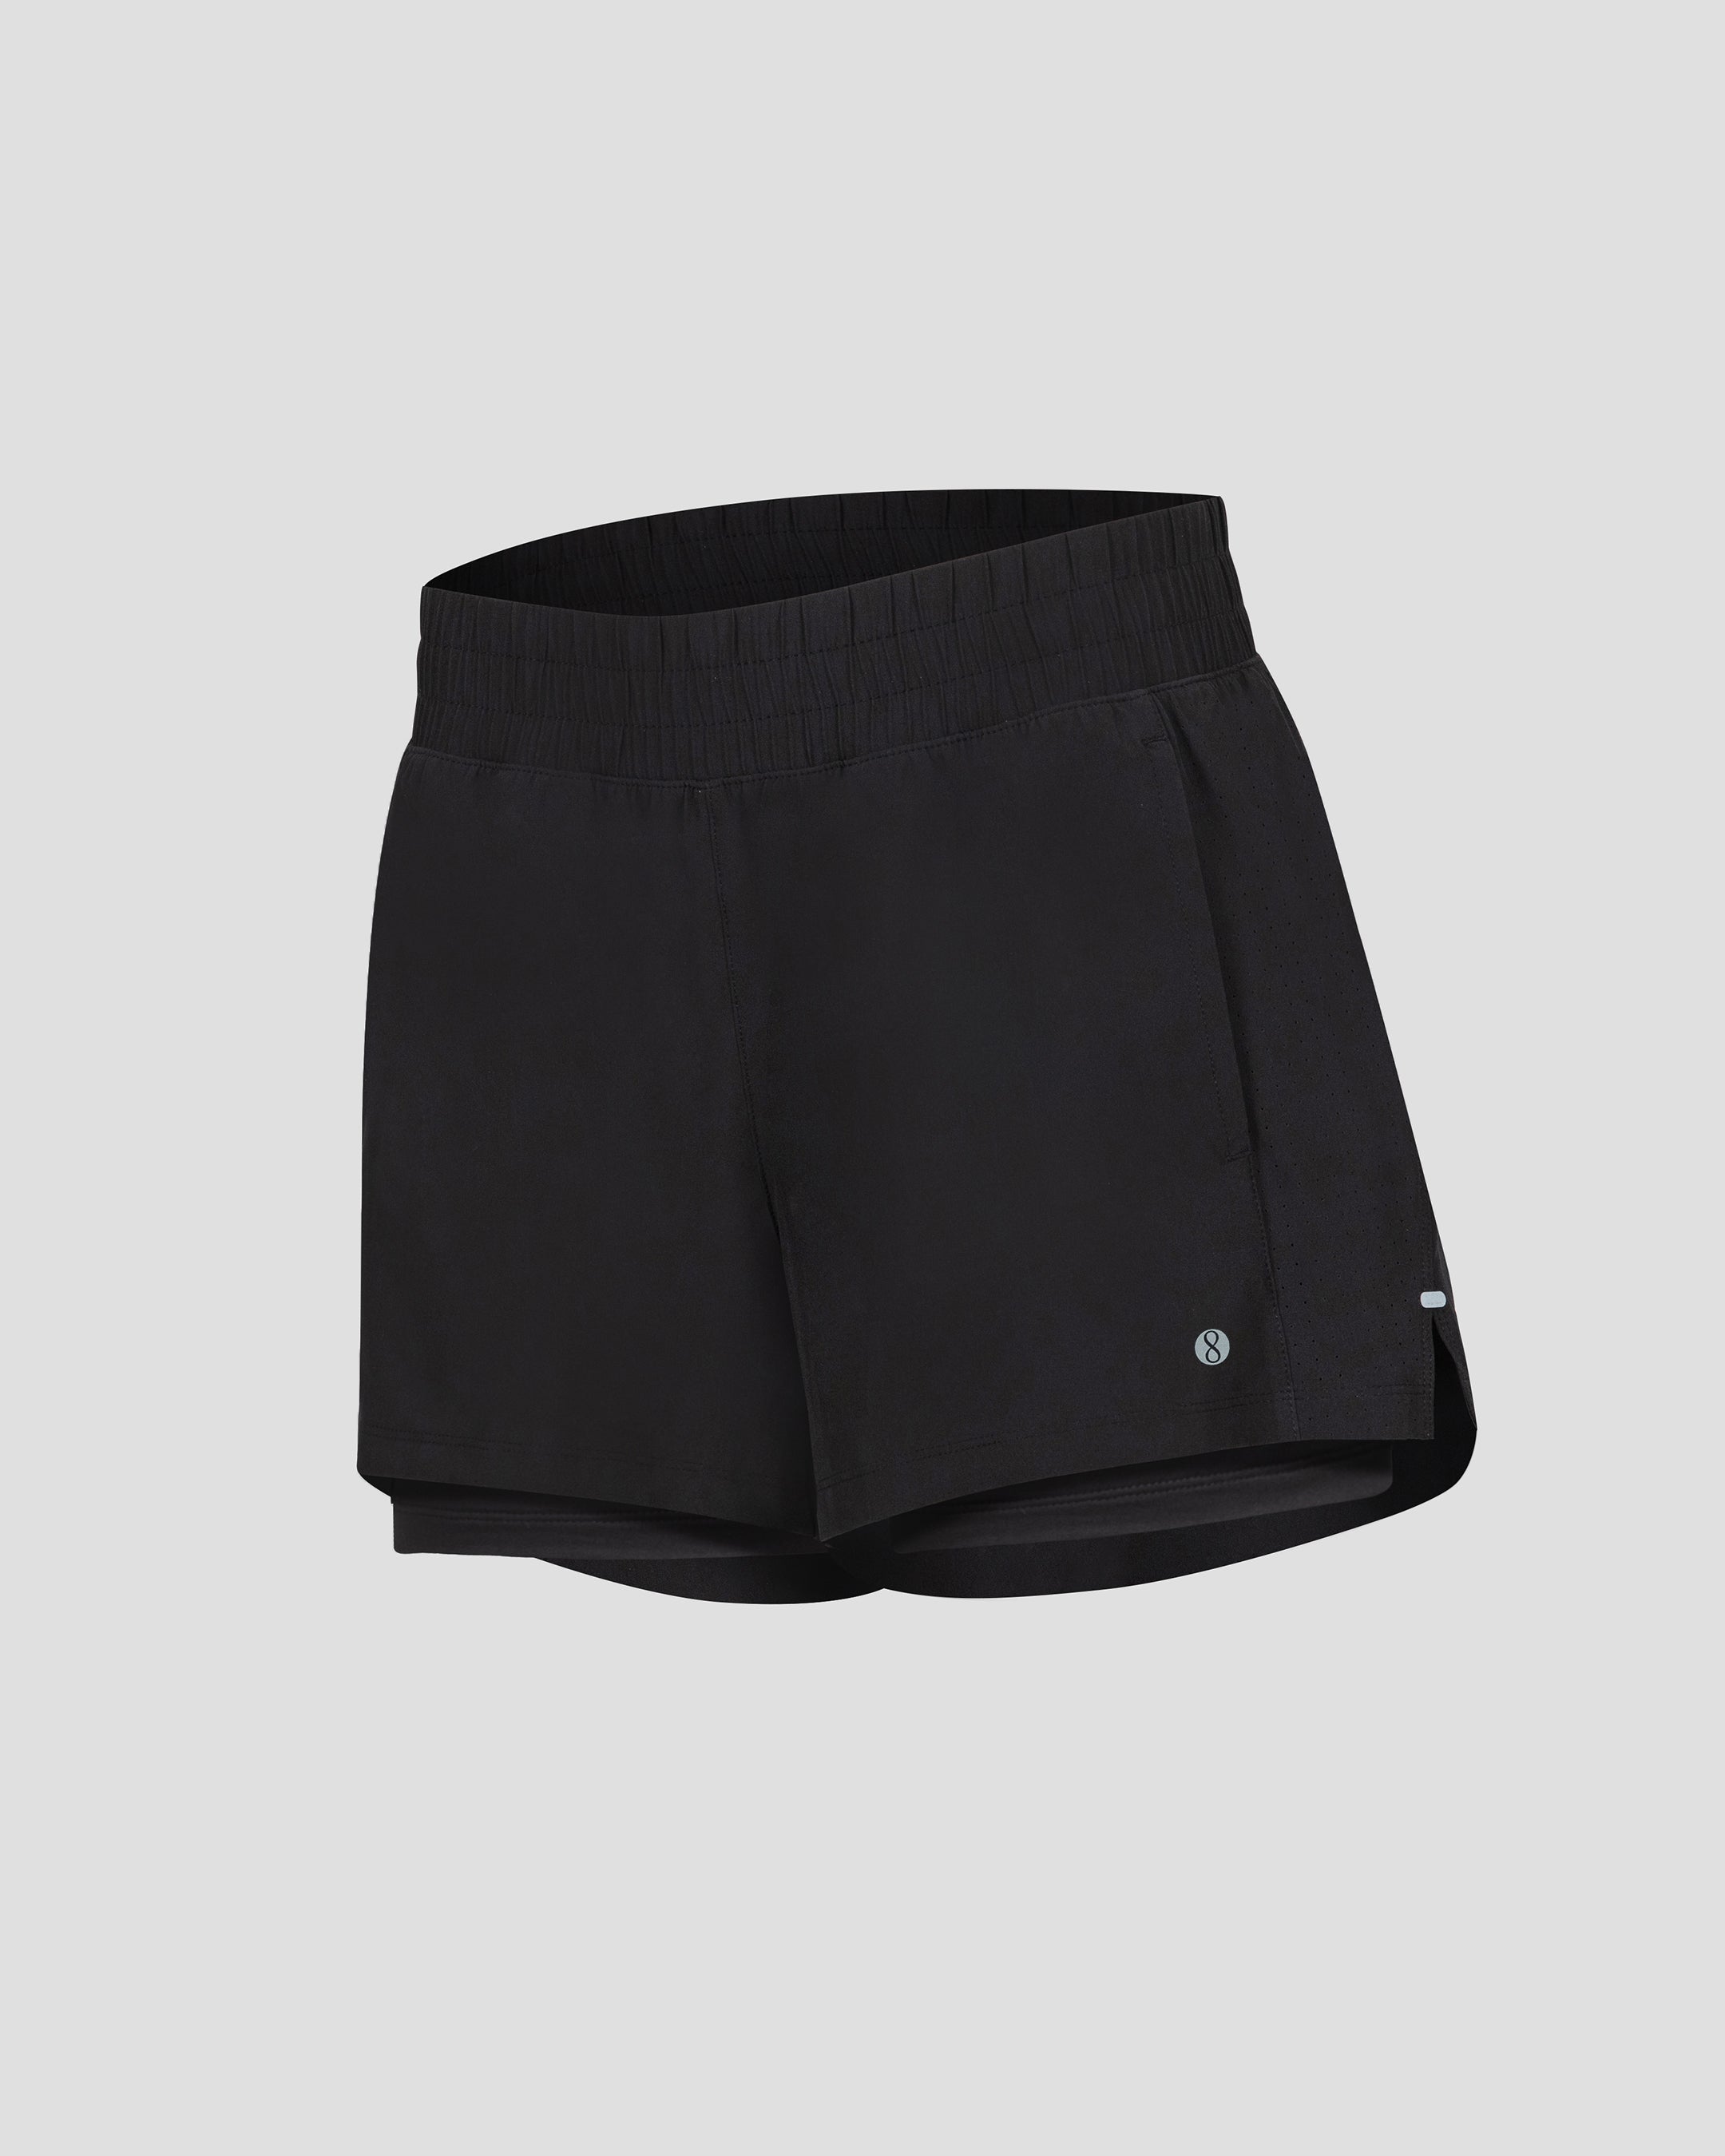 Black Under Shorts with Pockets  Thigh Protection Shorts - 8